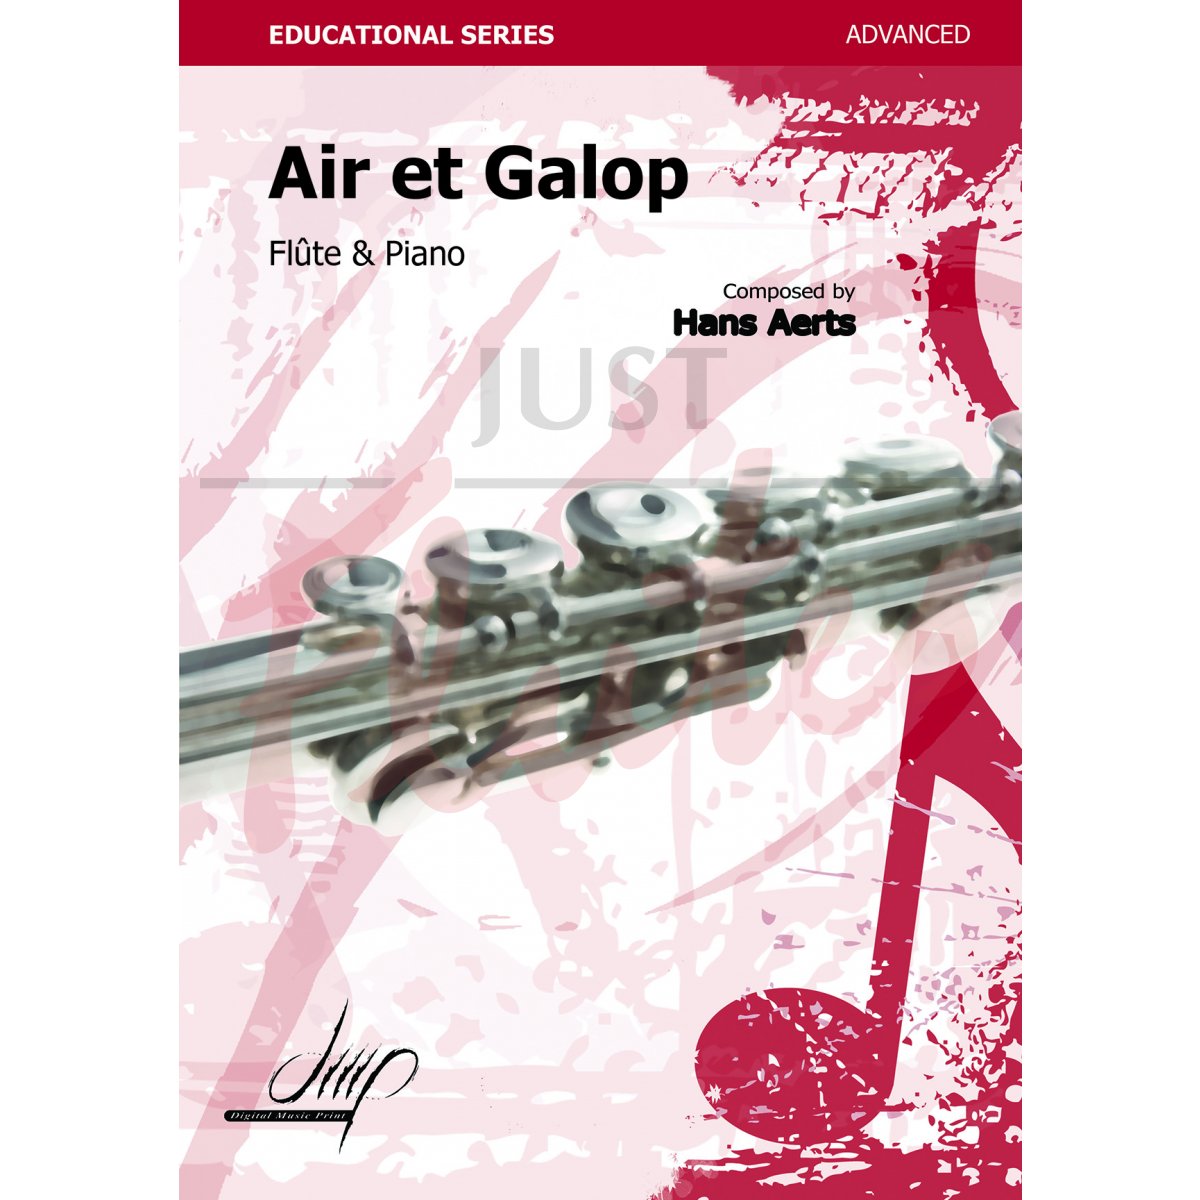 Air et Galop for Flute and Piano